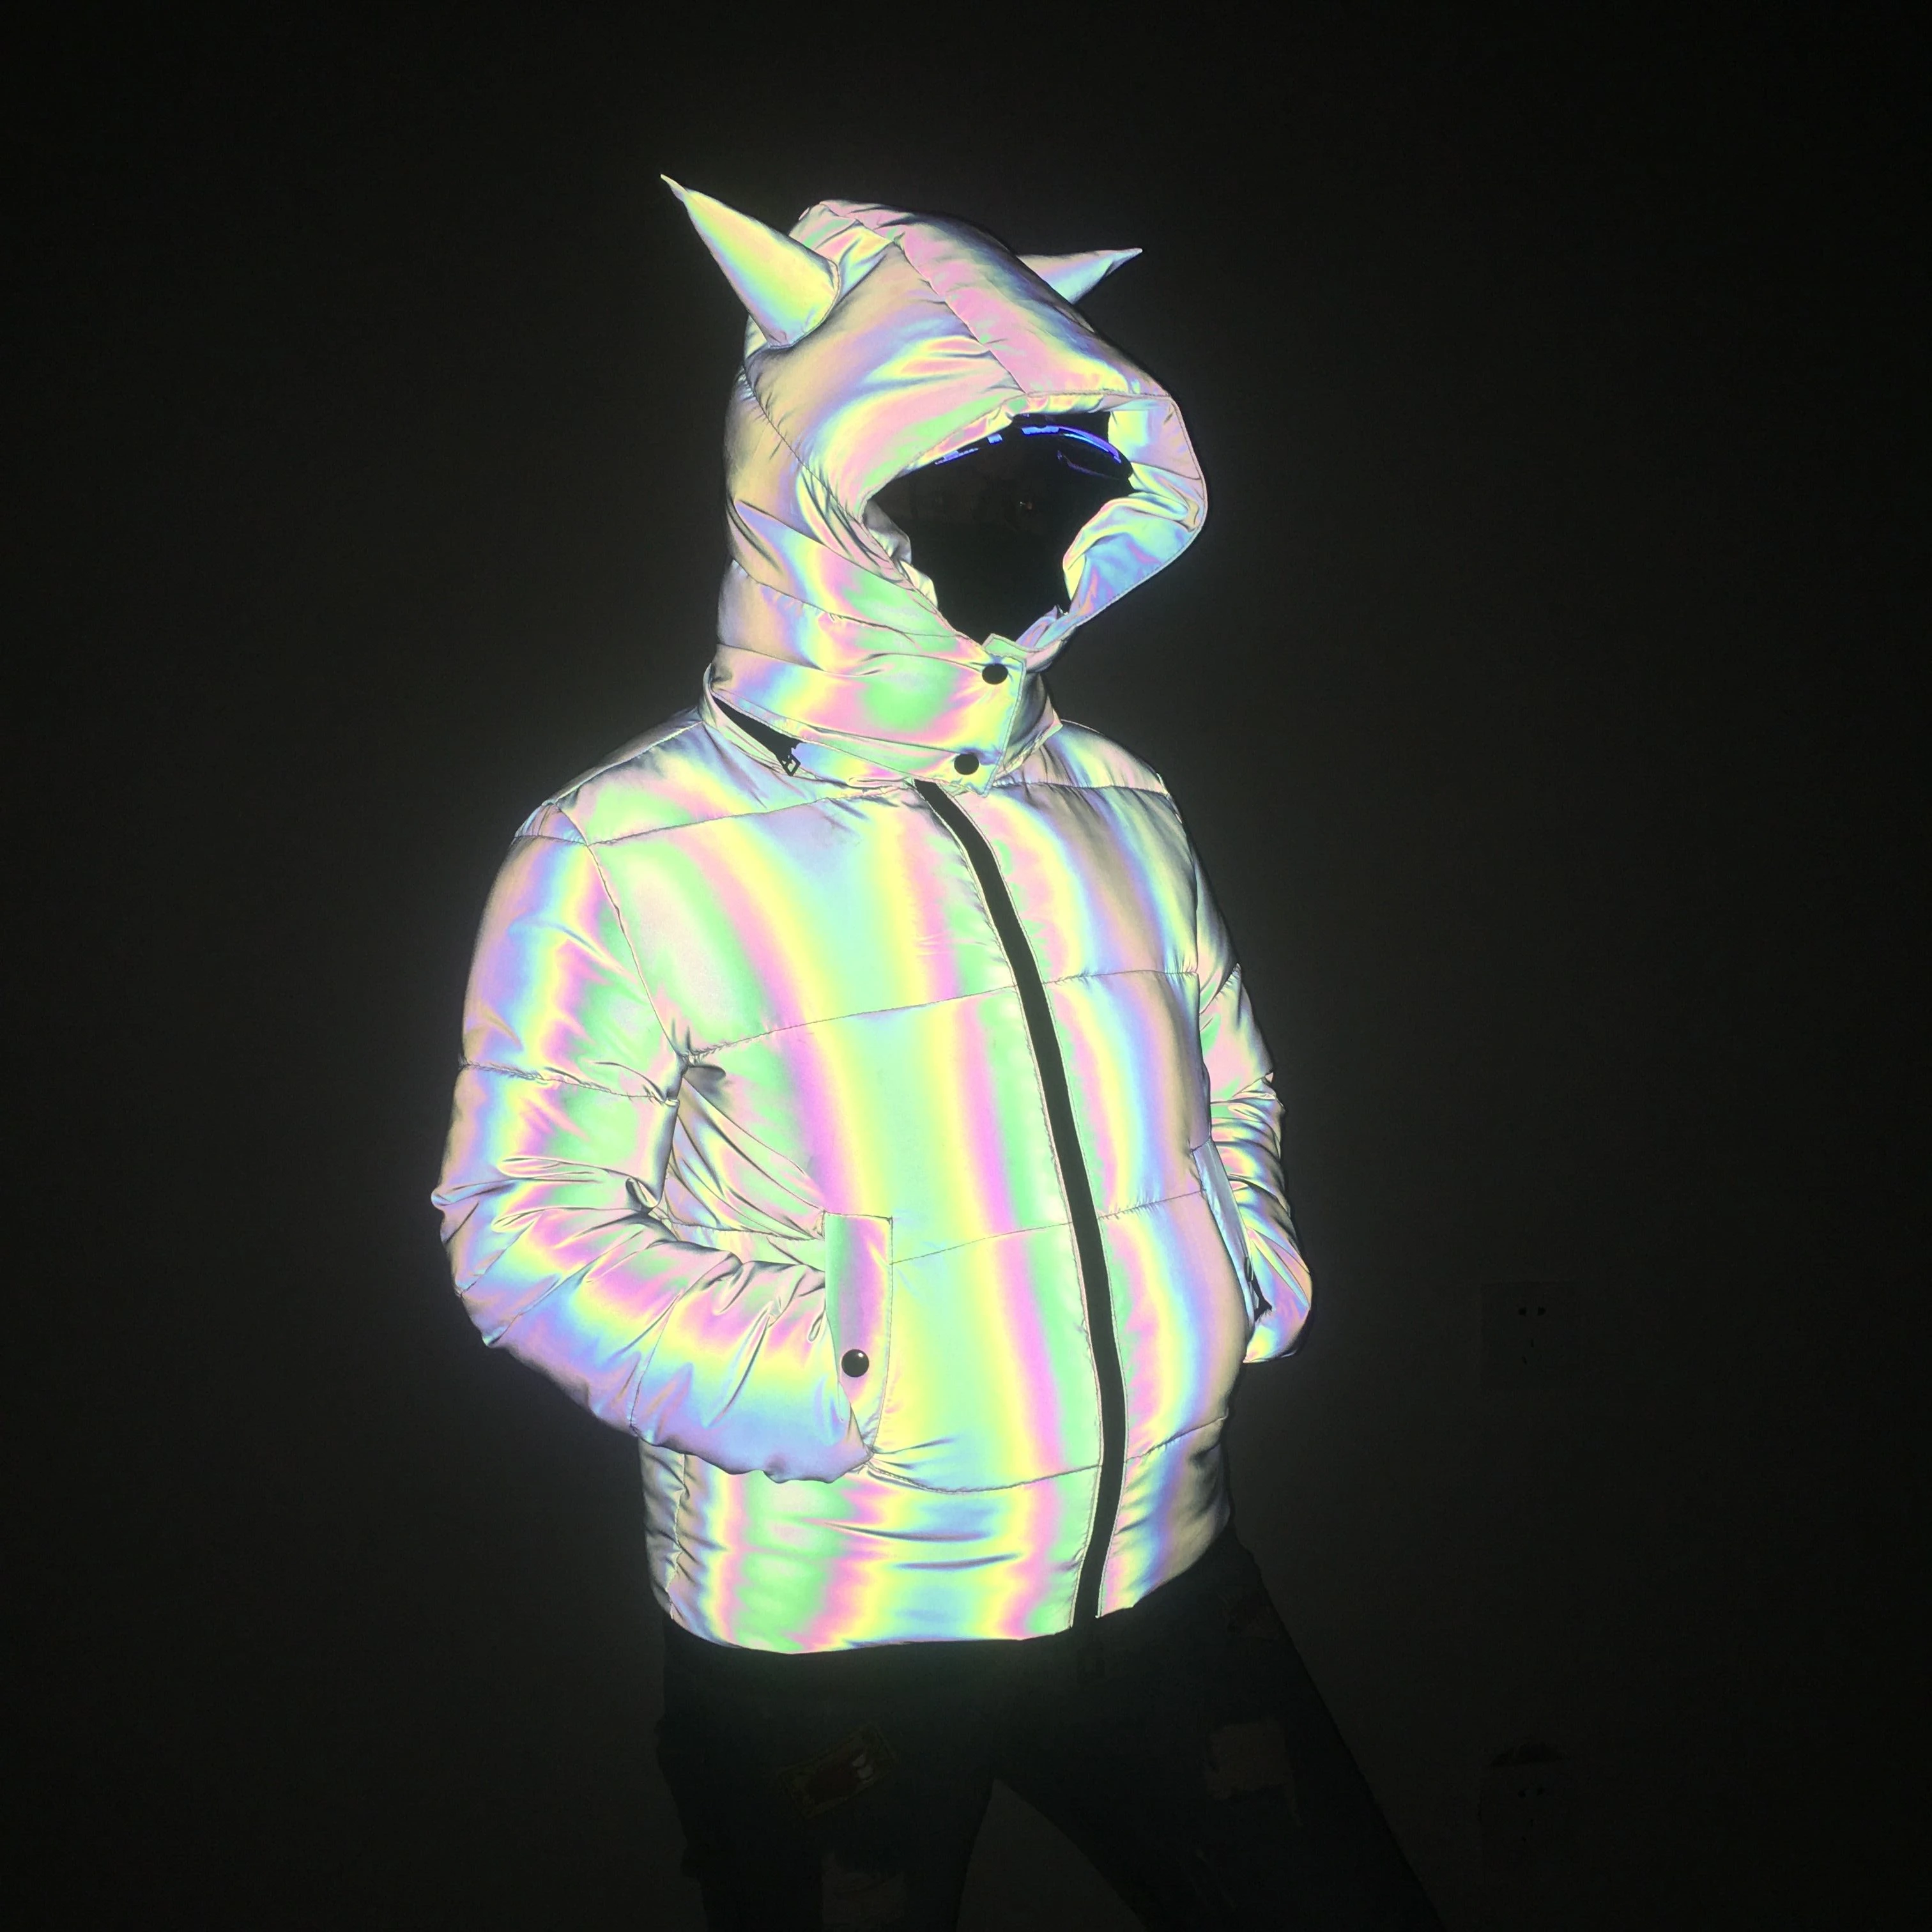  Springs Rainbow Reflective Jacket Holographic Winter